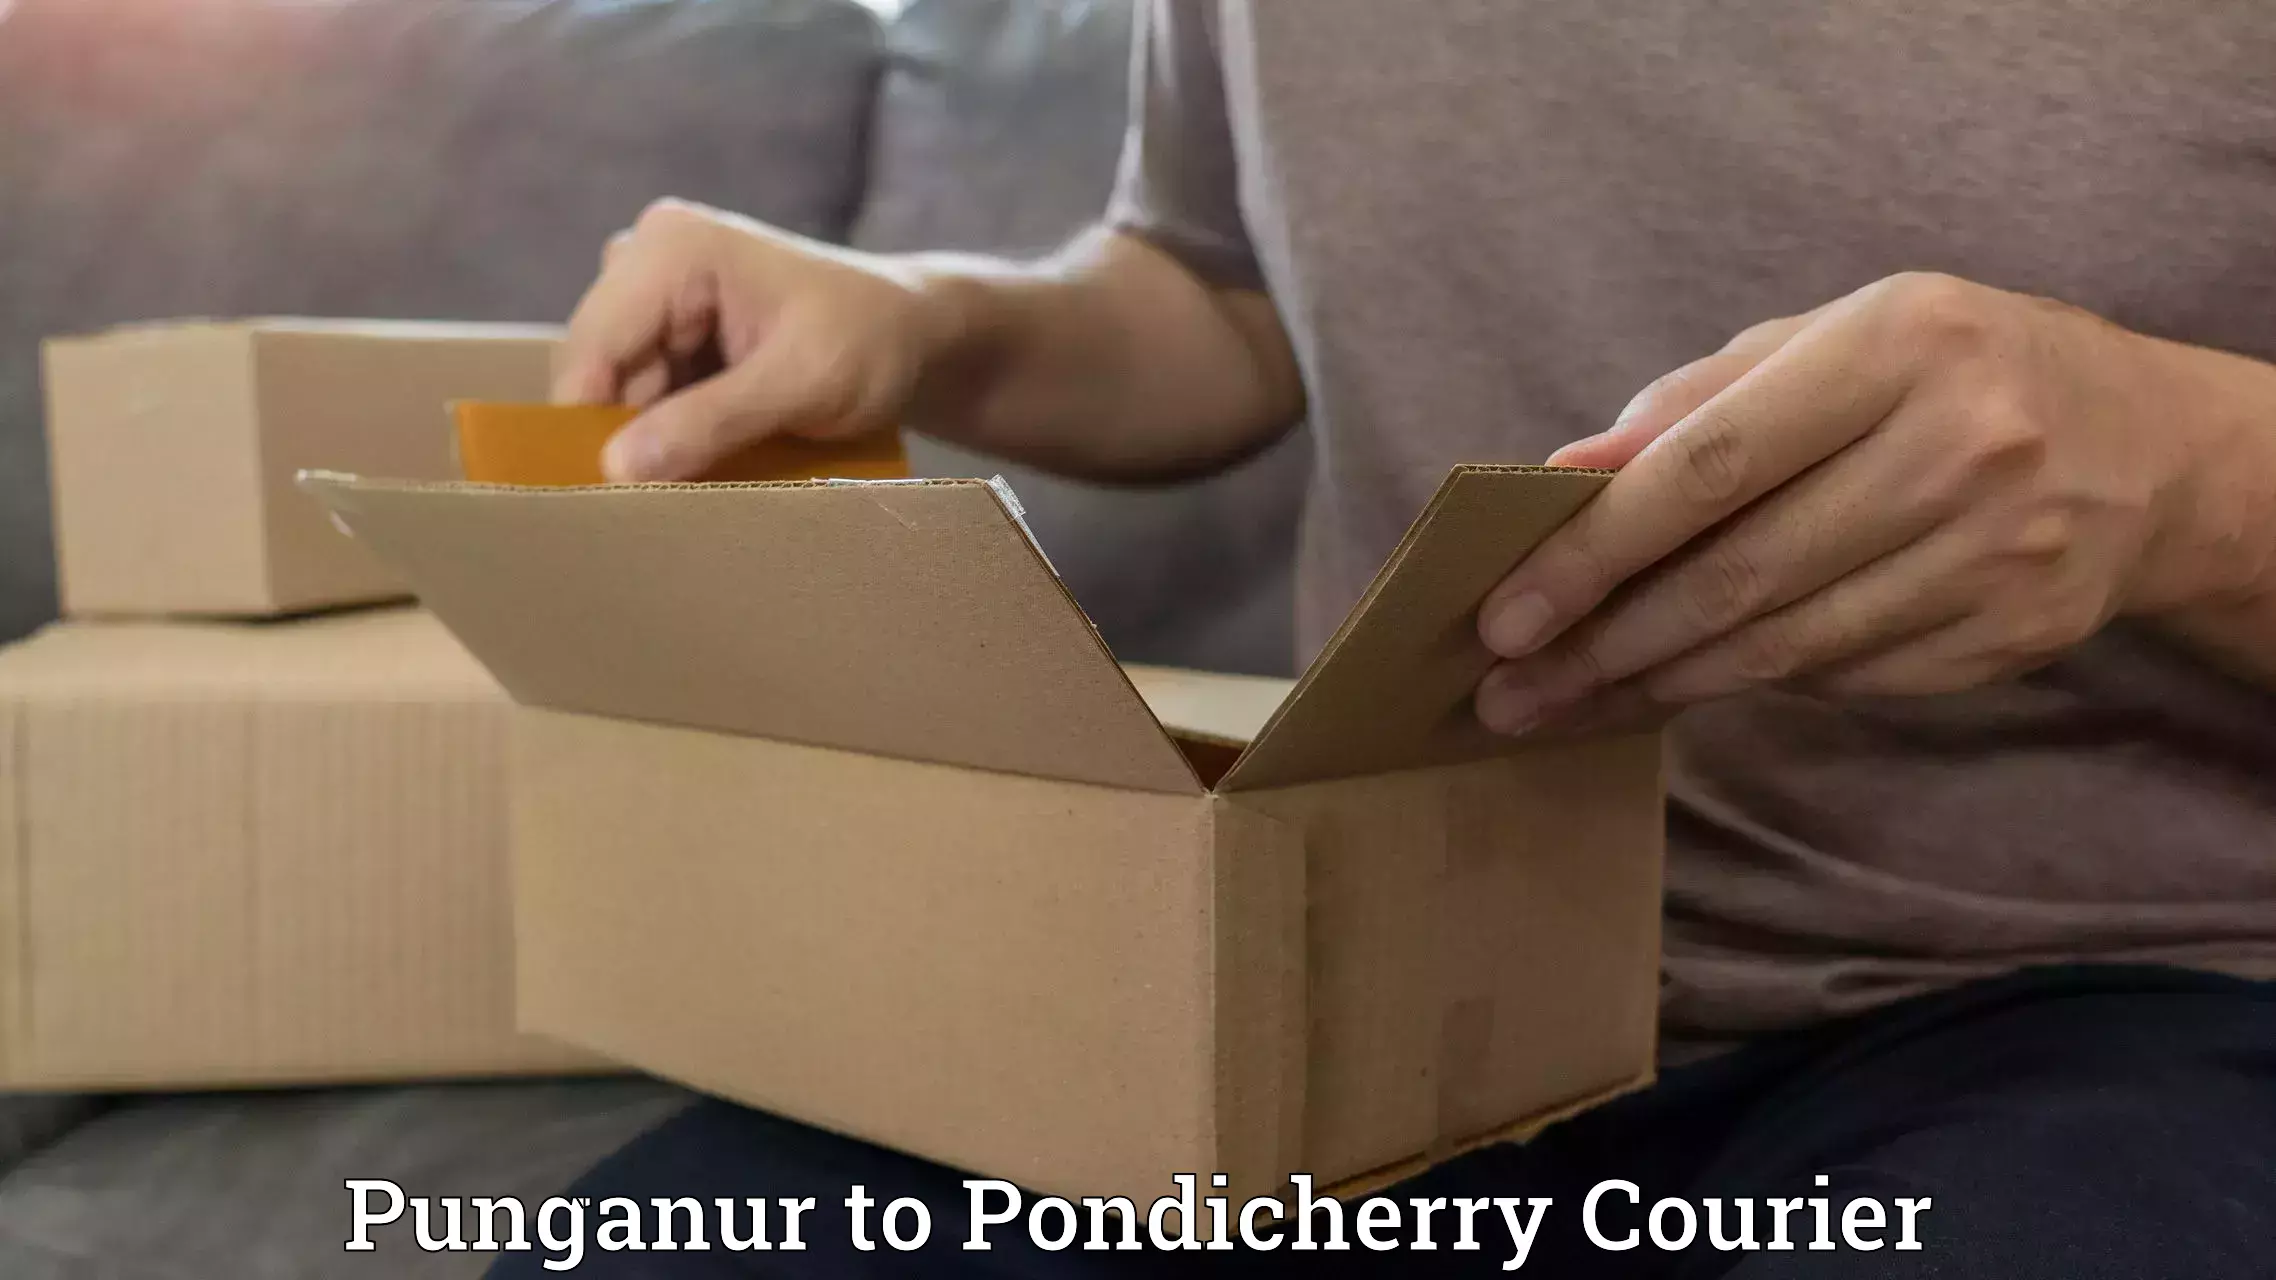 Advanced delivery network Punganur to Pondicherry